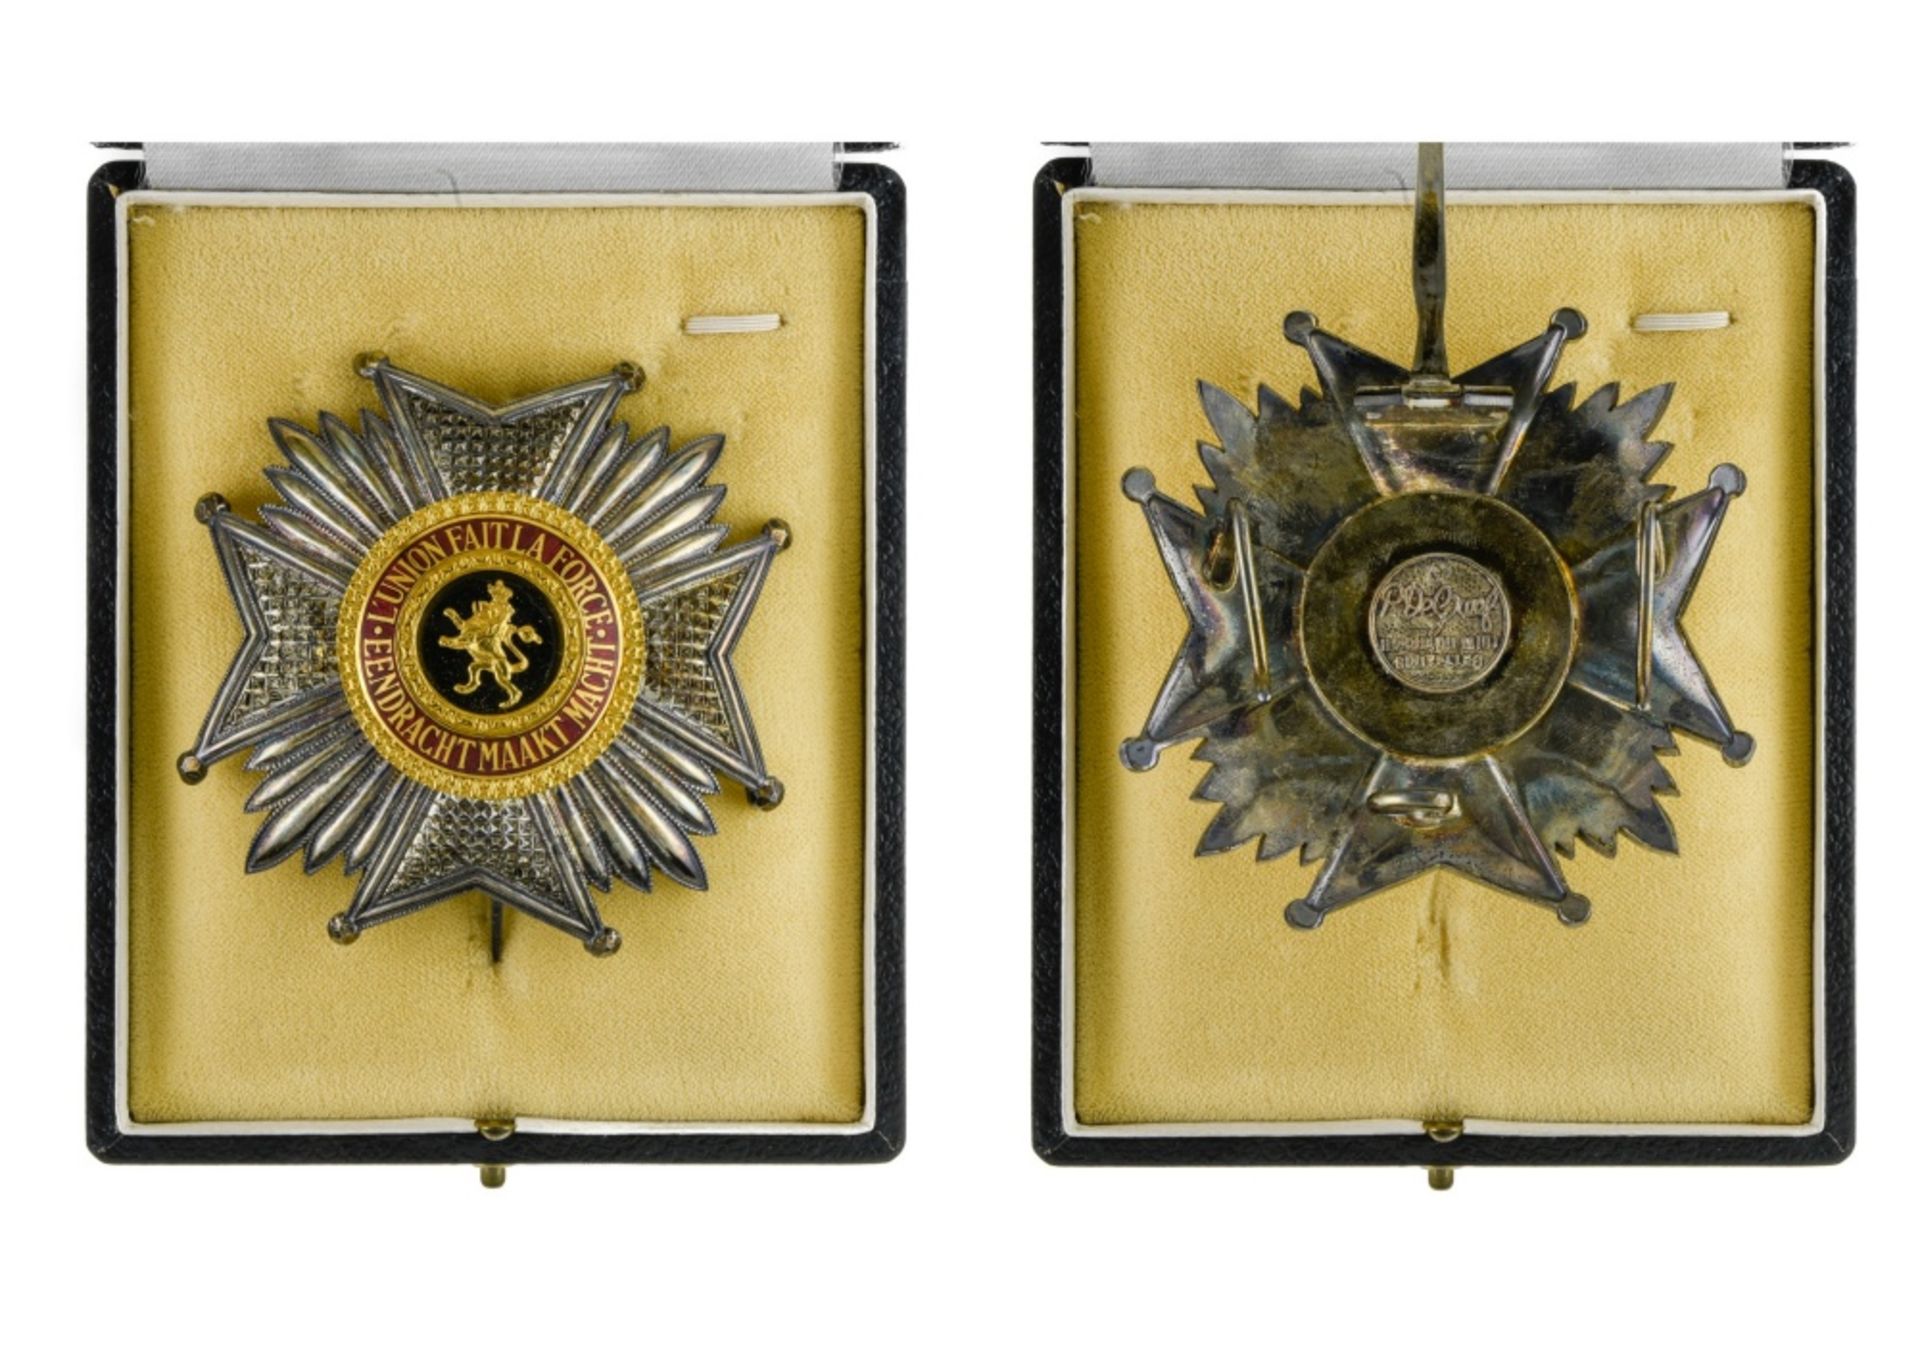 Belgium Order of Leopold, Grand officer's breast badge, bilingual, signed De Greef. In a case by